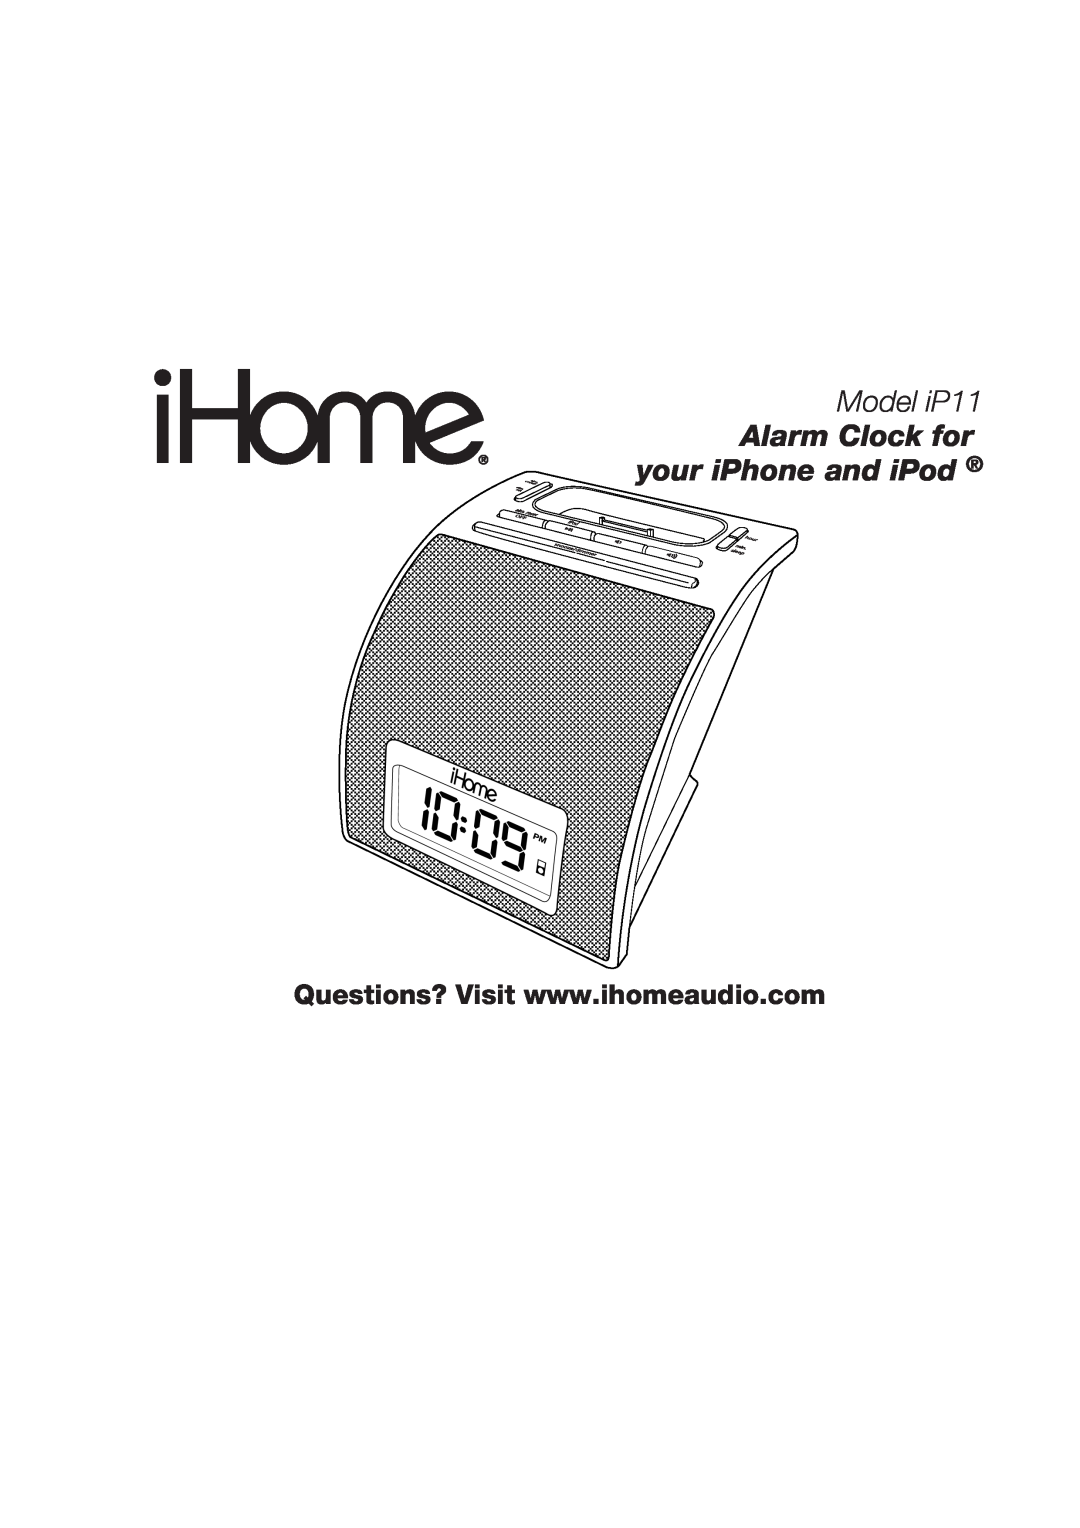 iHome manual Model iP11, Alarm Clock for your iPhone and iPod 